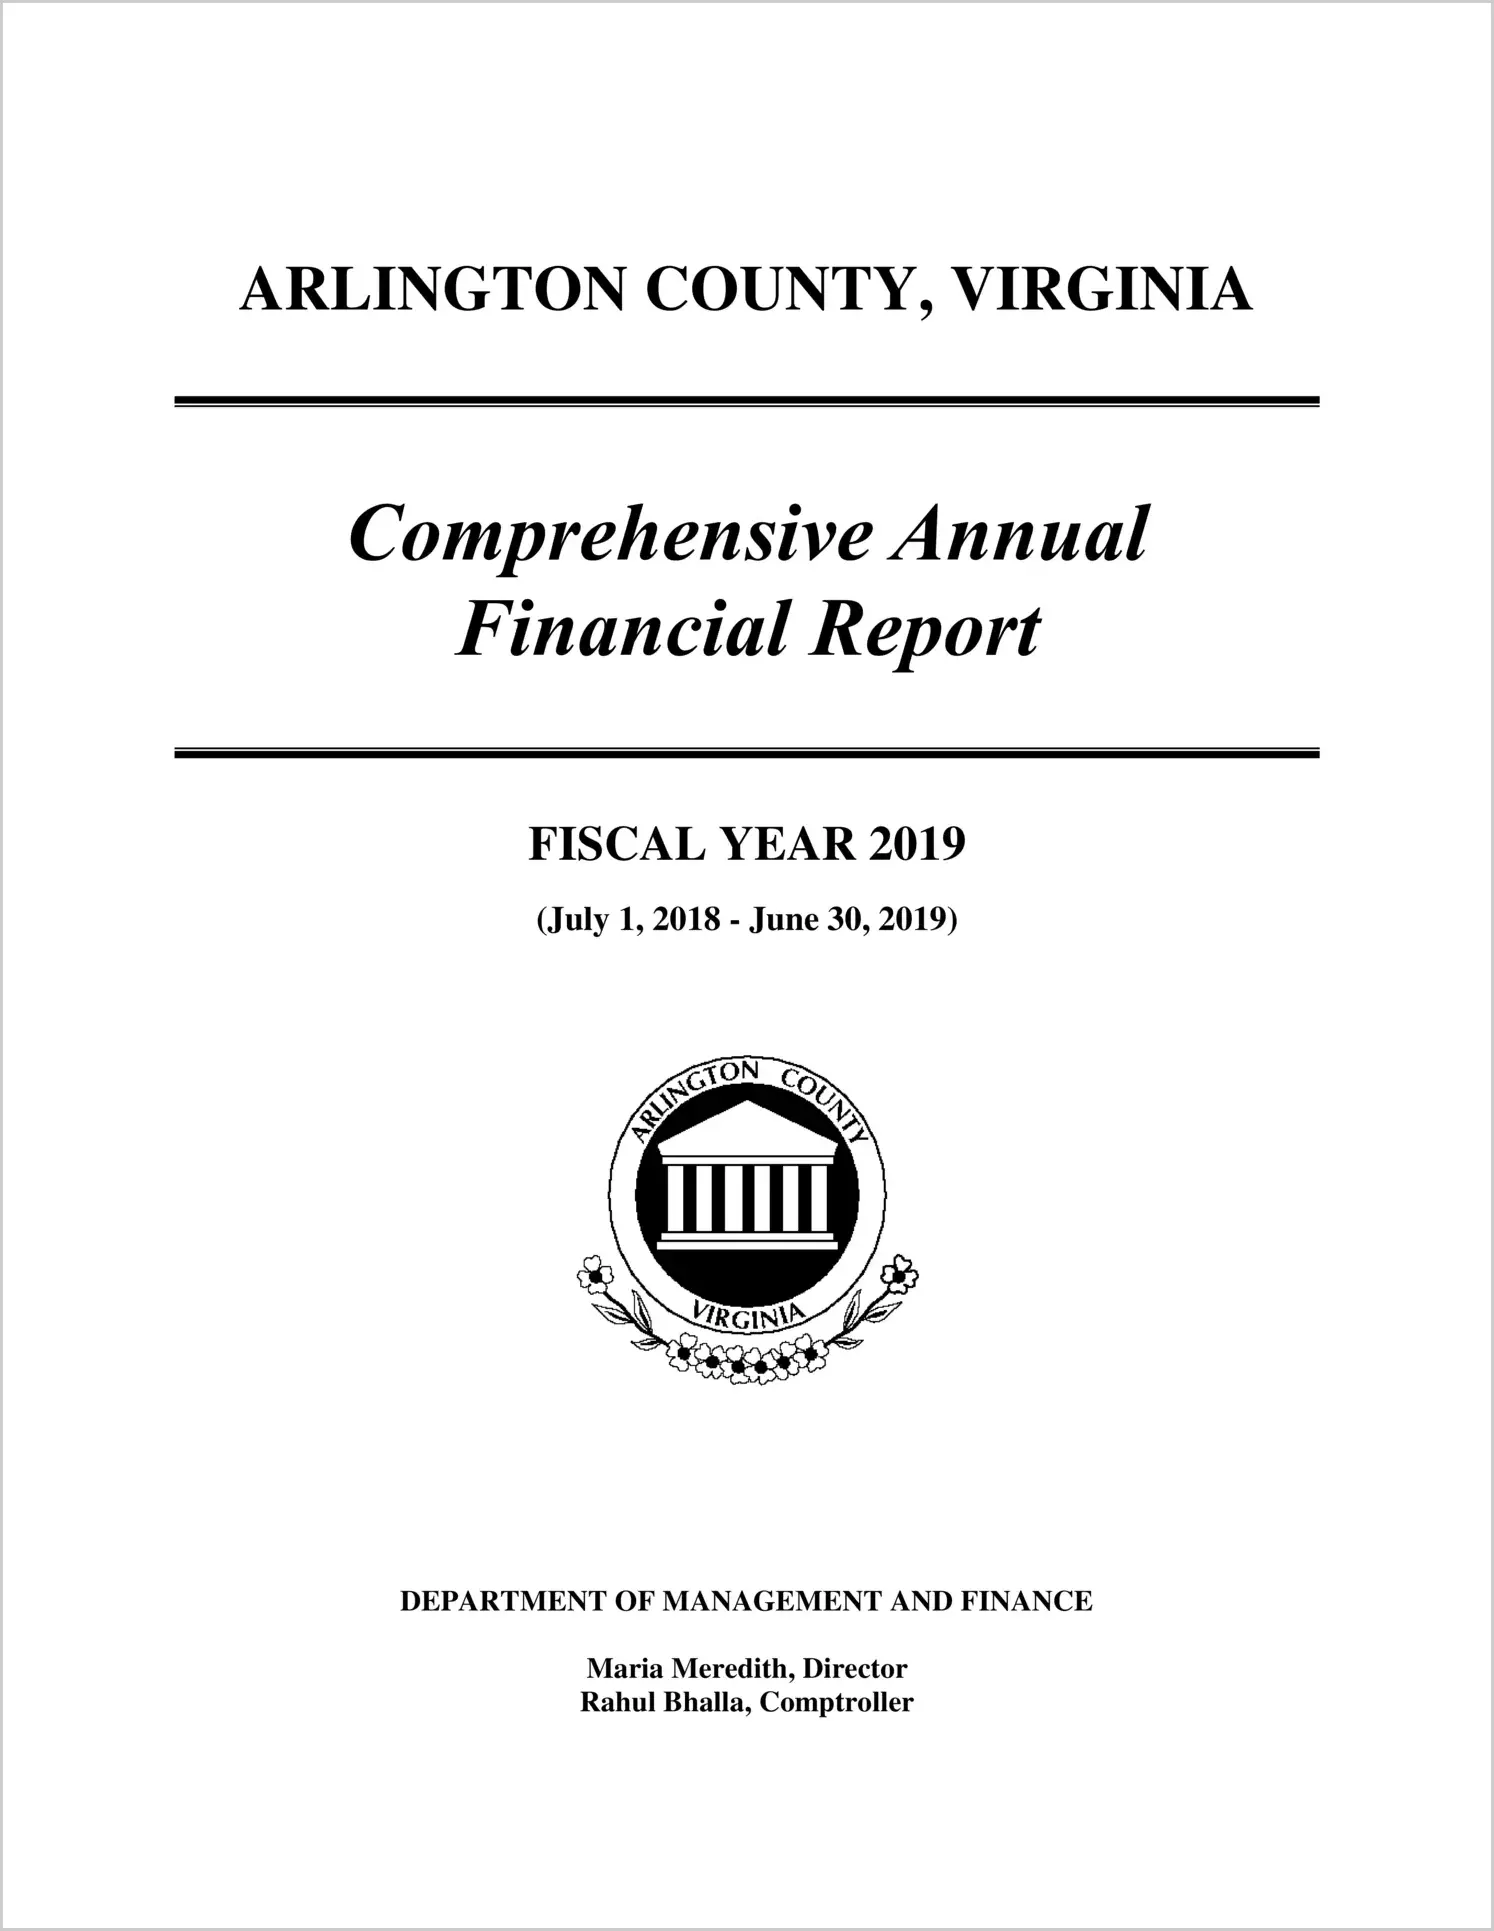 2019 Annual Financial Report for County of Arlington